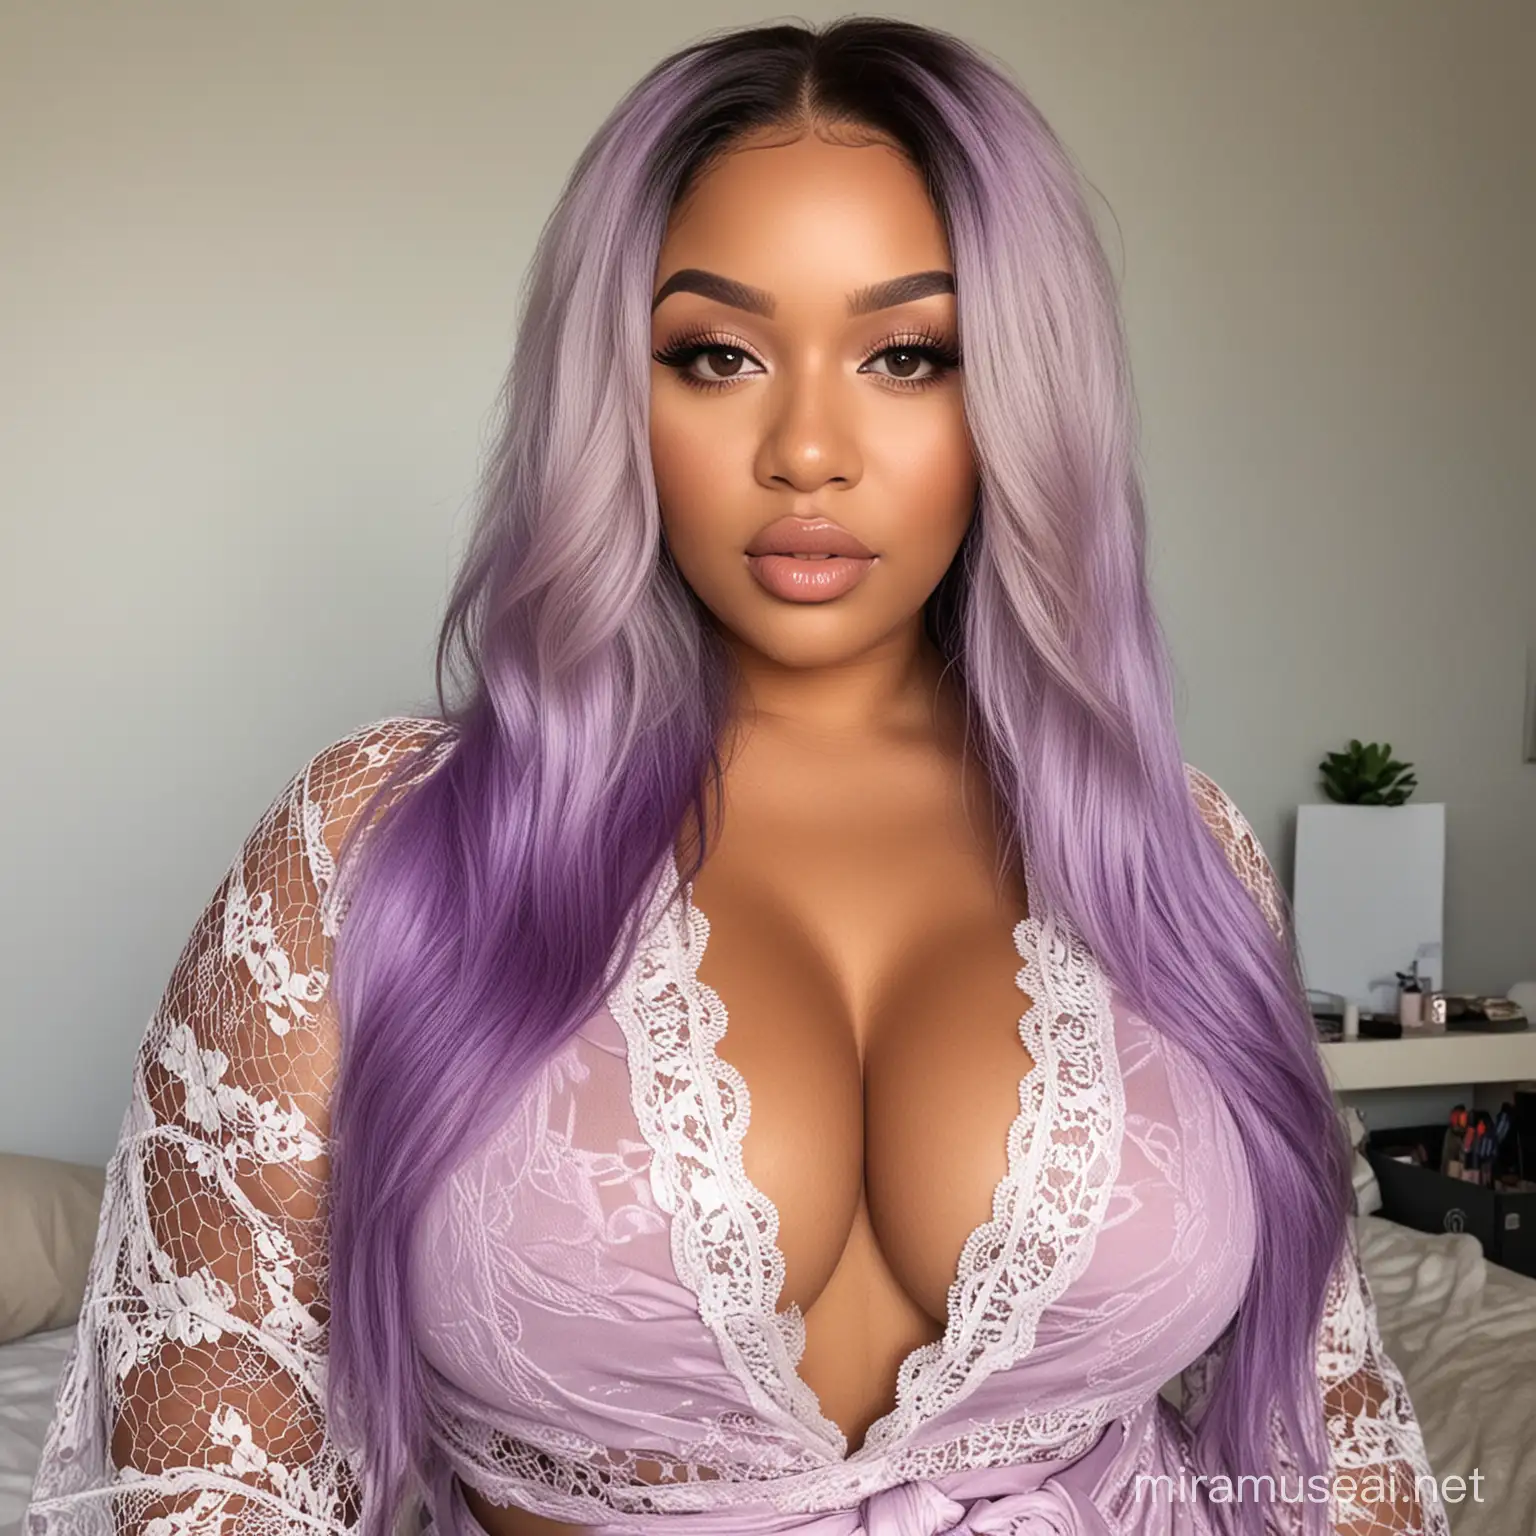 South African Curvy Model in Purple Lingerie with Lace Front Weave